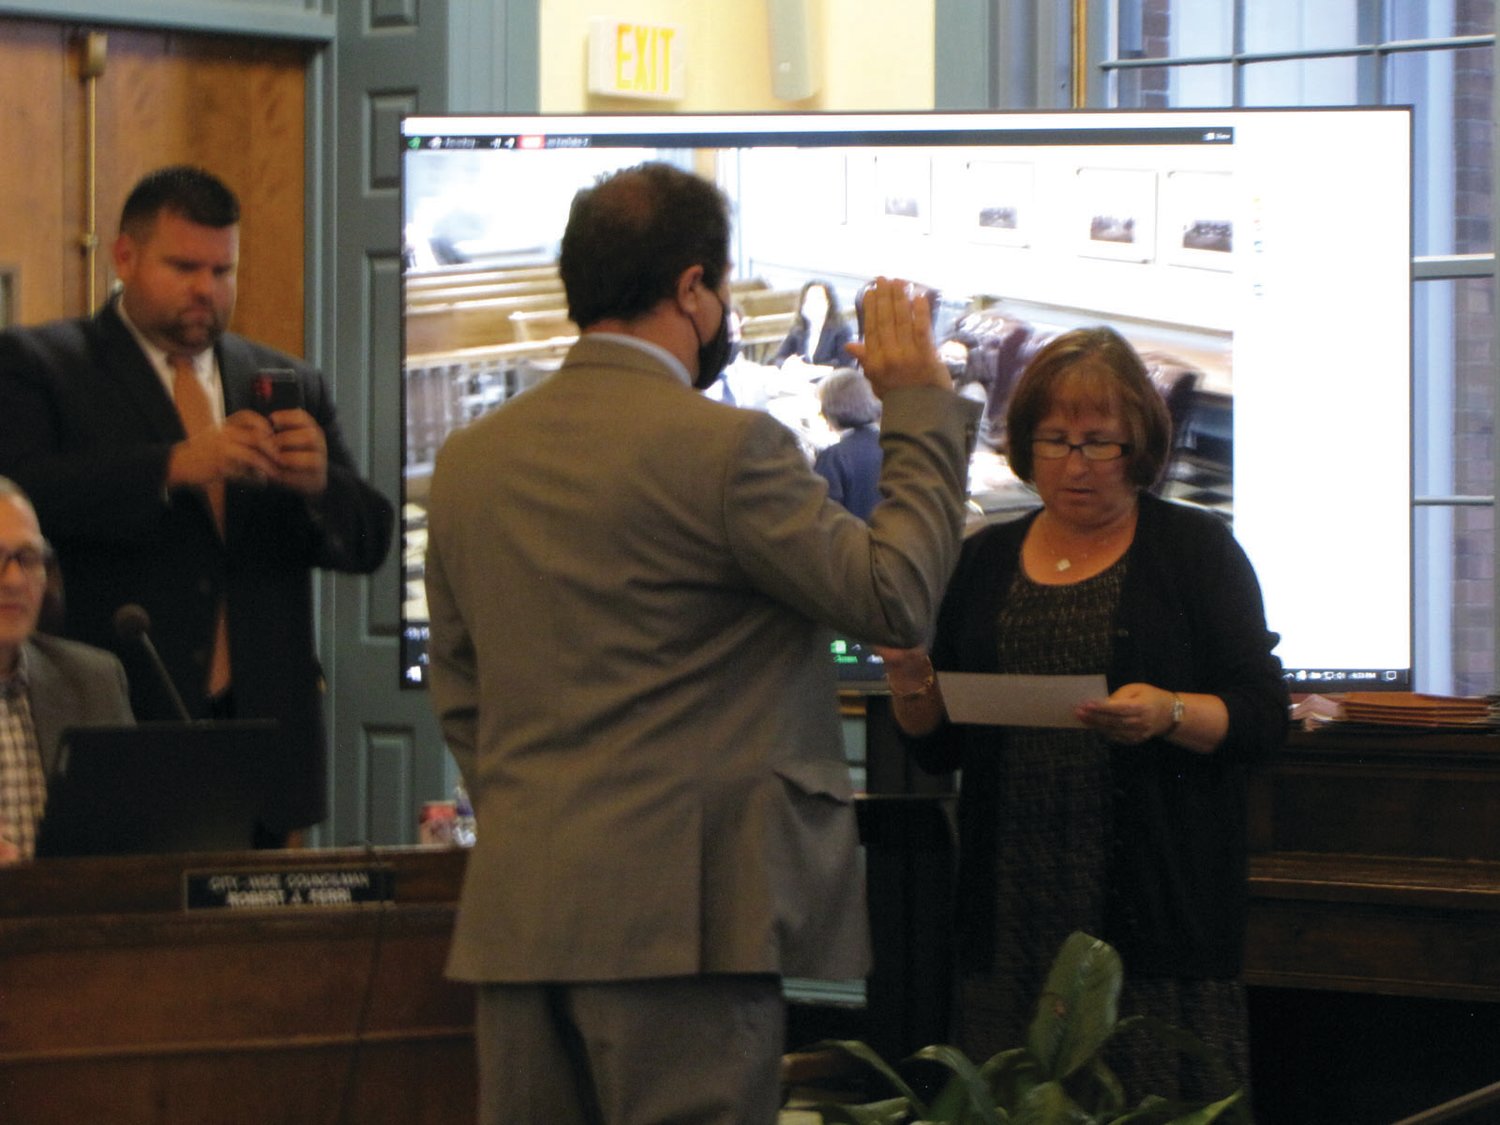 TAKING THE OATH: Richard Campopiano is sworn in after the City Council’s vote on Monday. He immediately took his seat as the Ward 4 representative and participated in the regular monthly meeting.